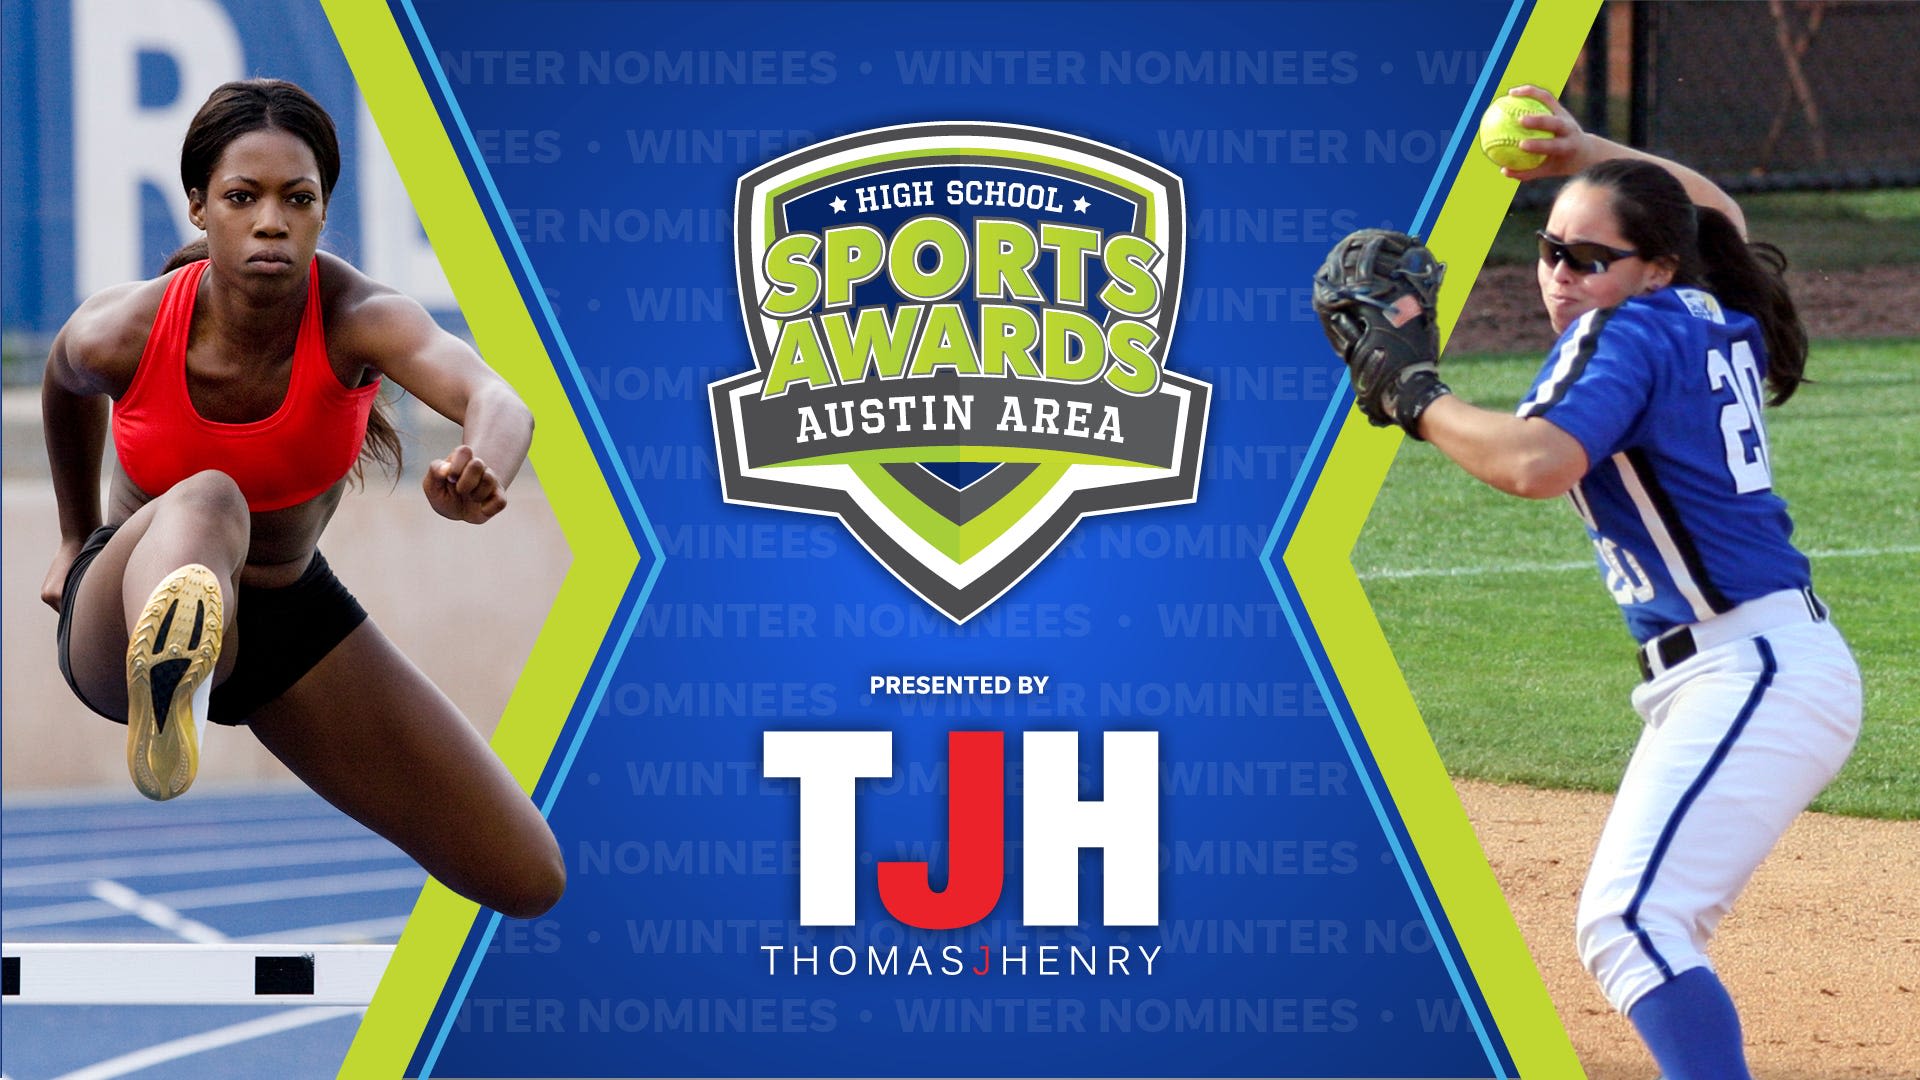 Meet the spring sports nominees for the Austin Area High School Sports Awards